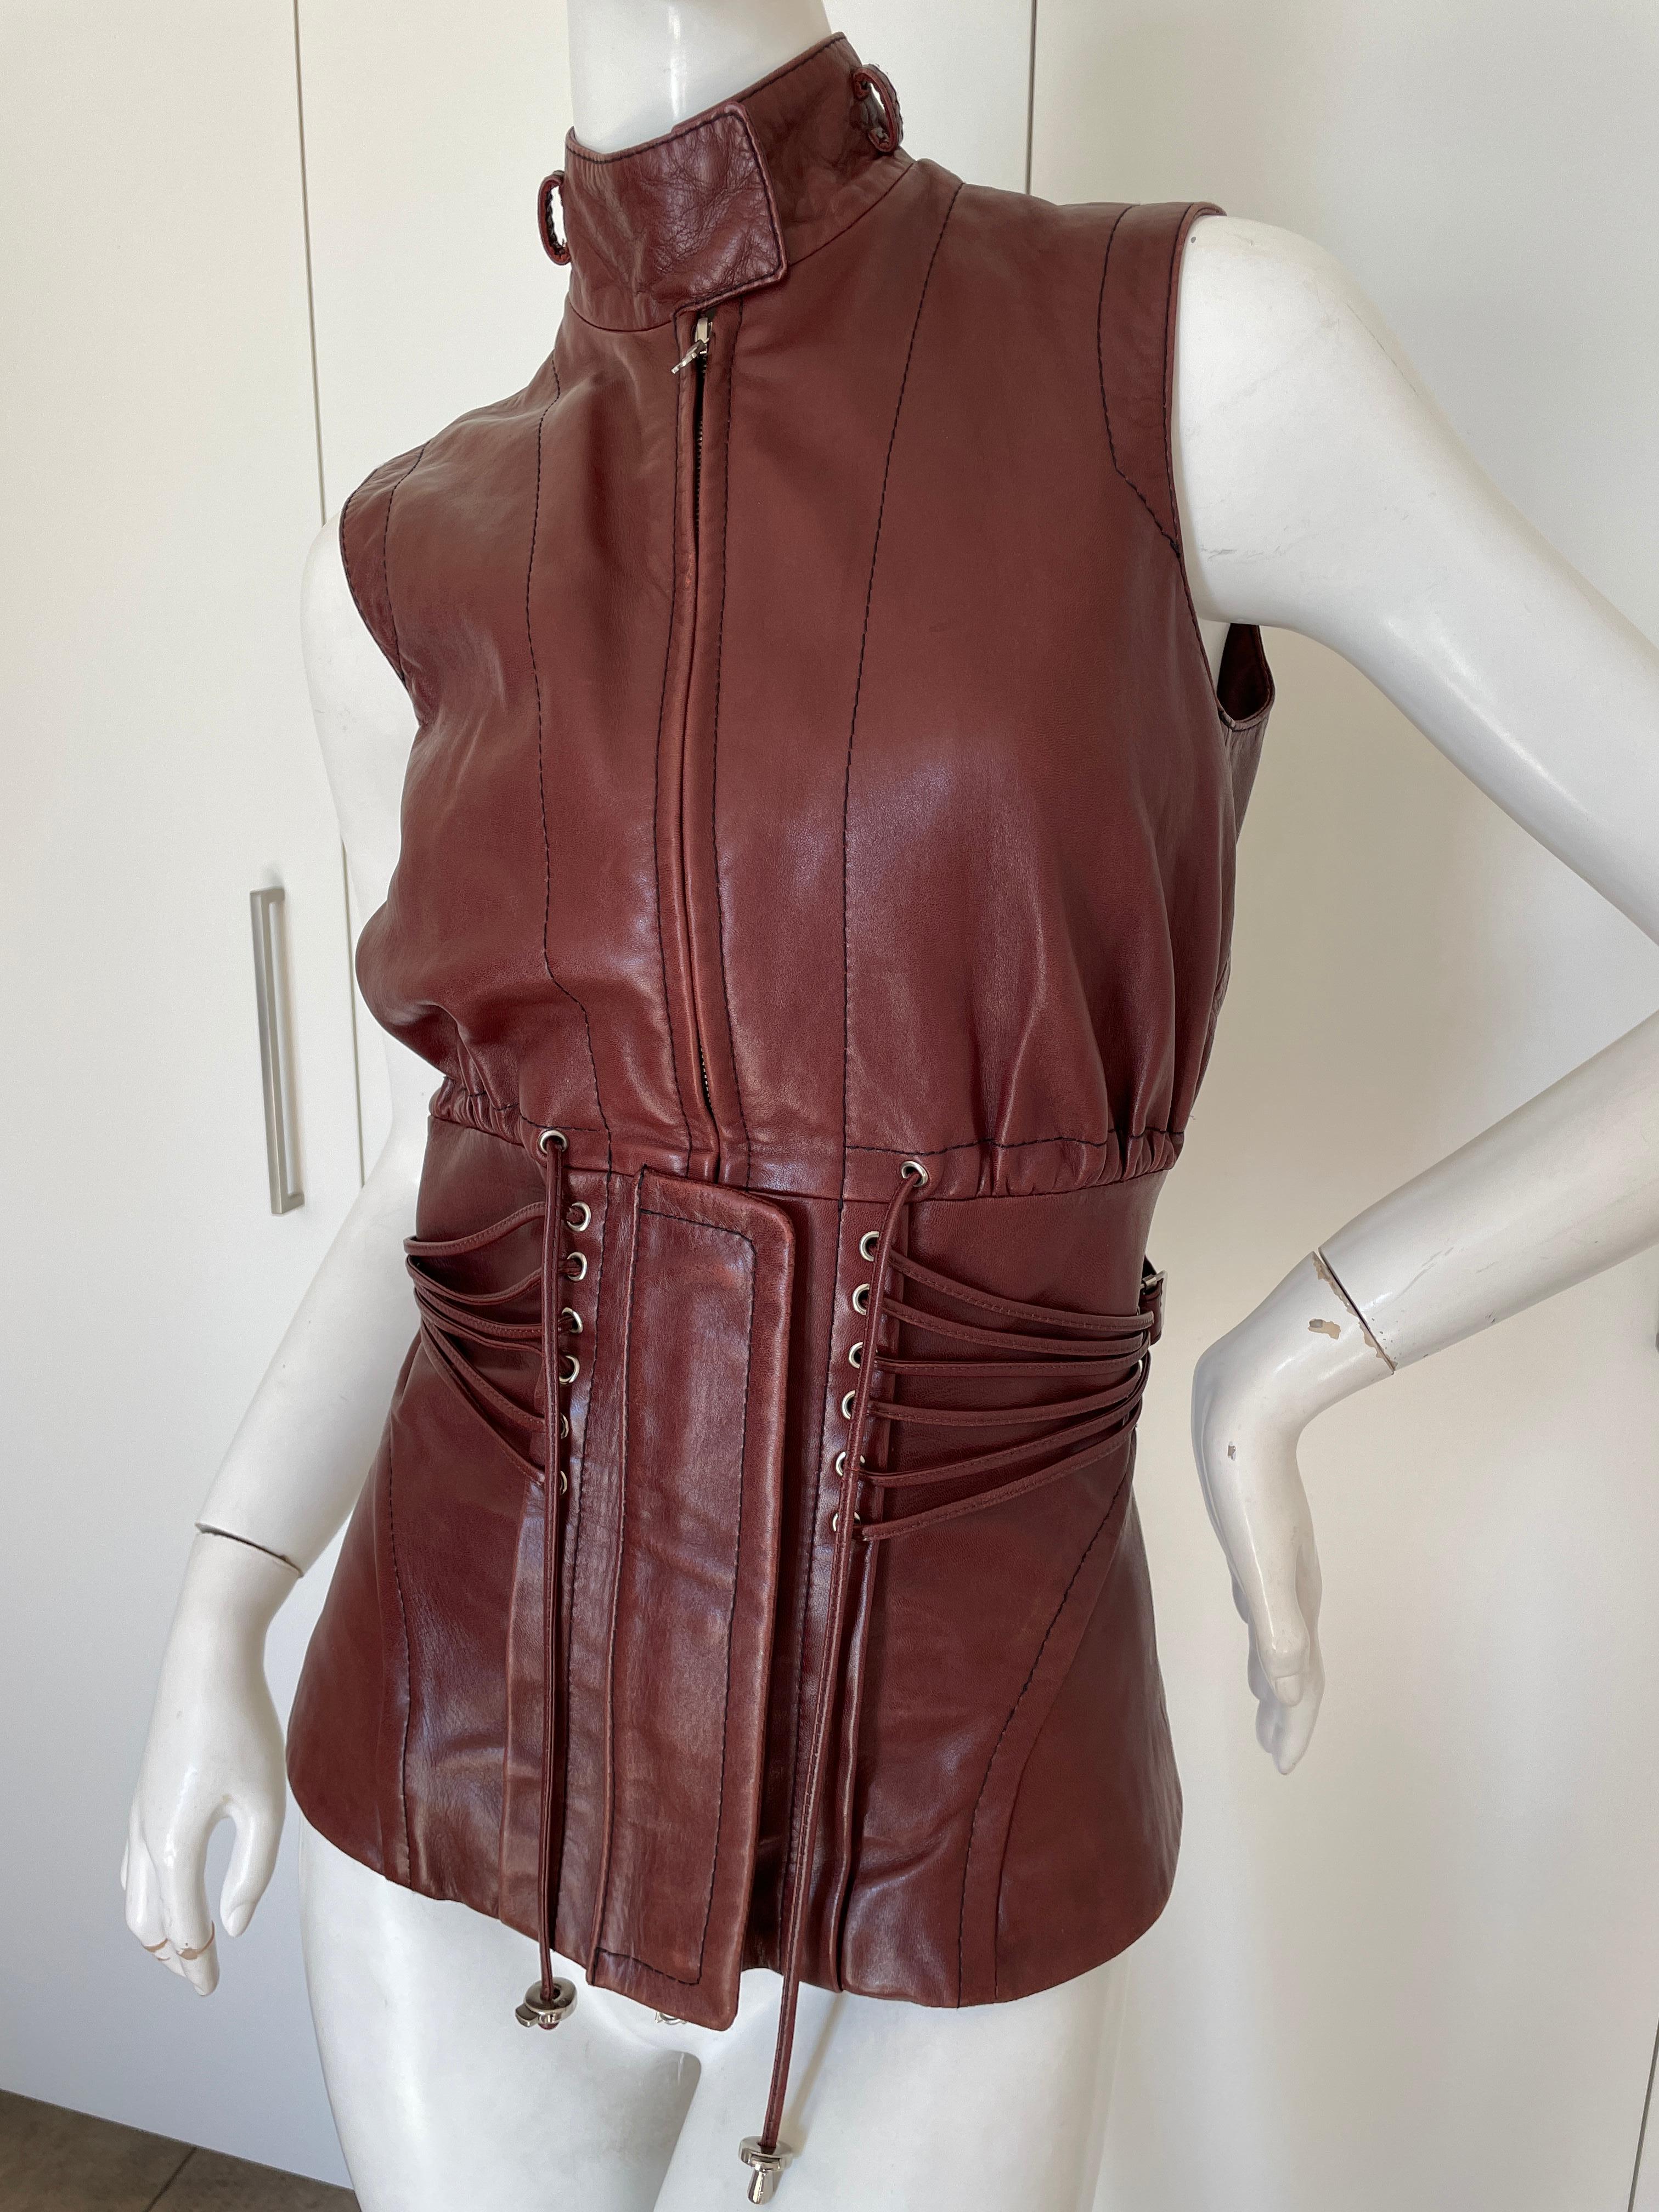  Gianfranco Ferre Vintage Lambskin Leather Moto Vest with Corset Lacing Details In Excellent Condition For Sale In Cloverdale, CA